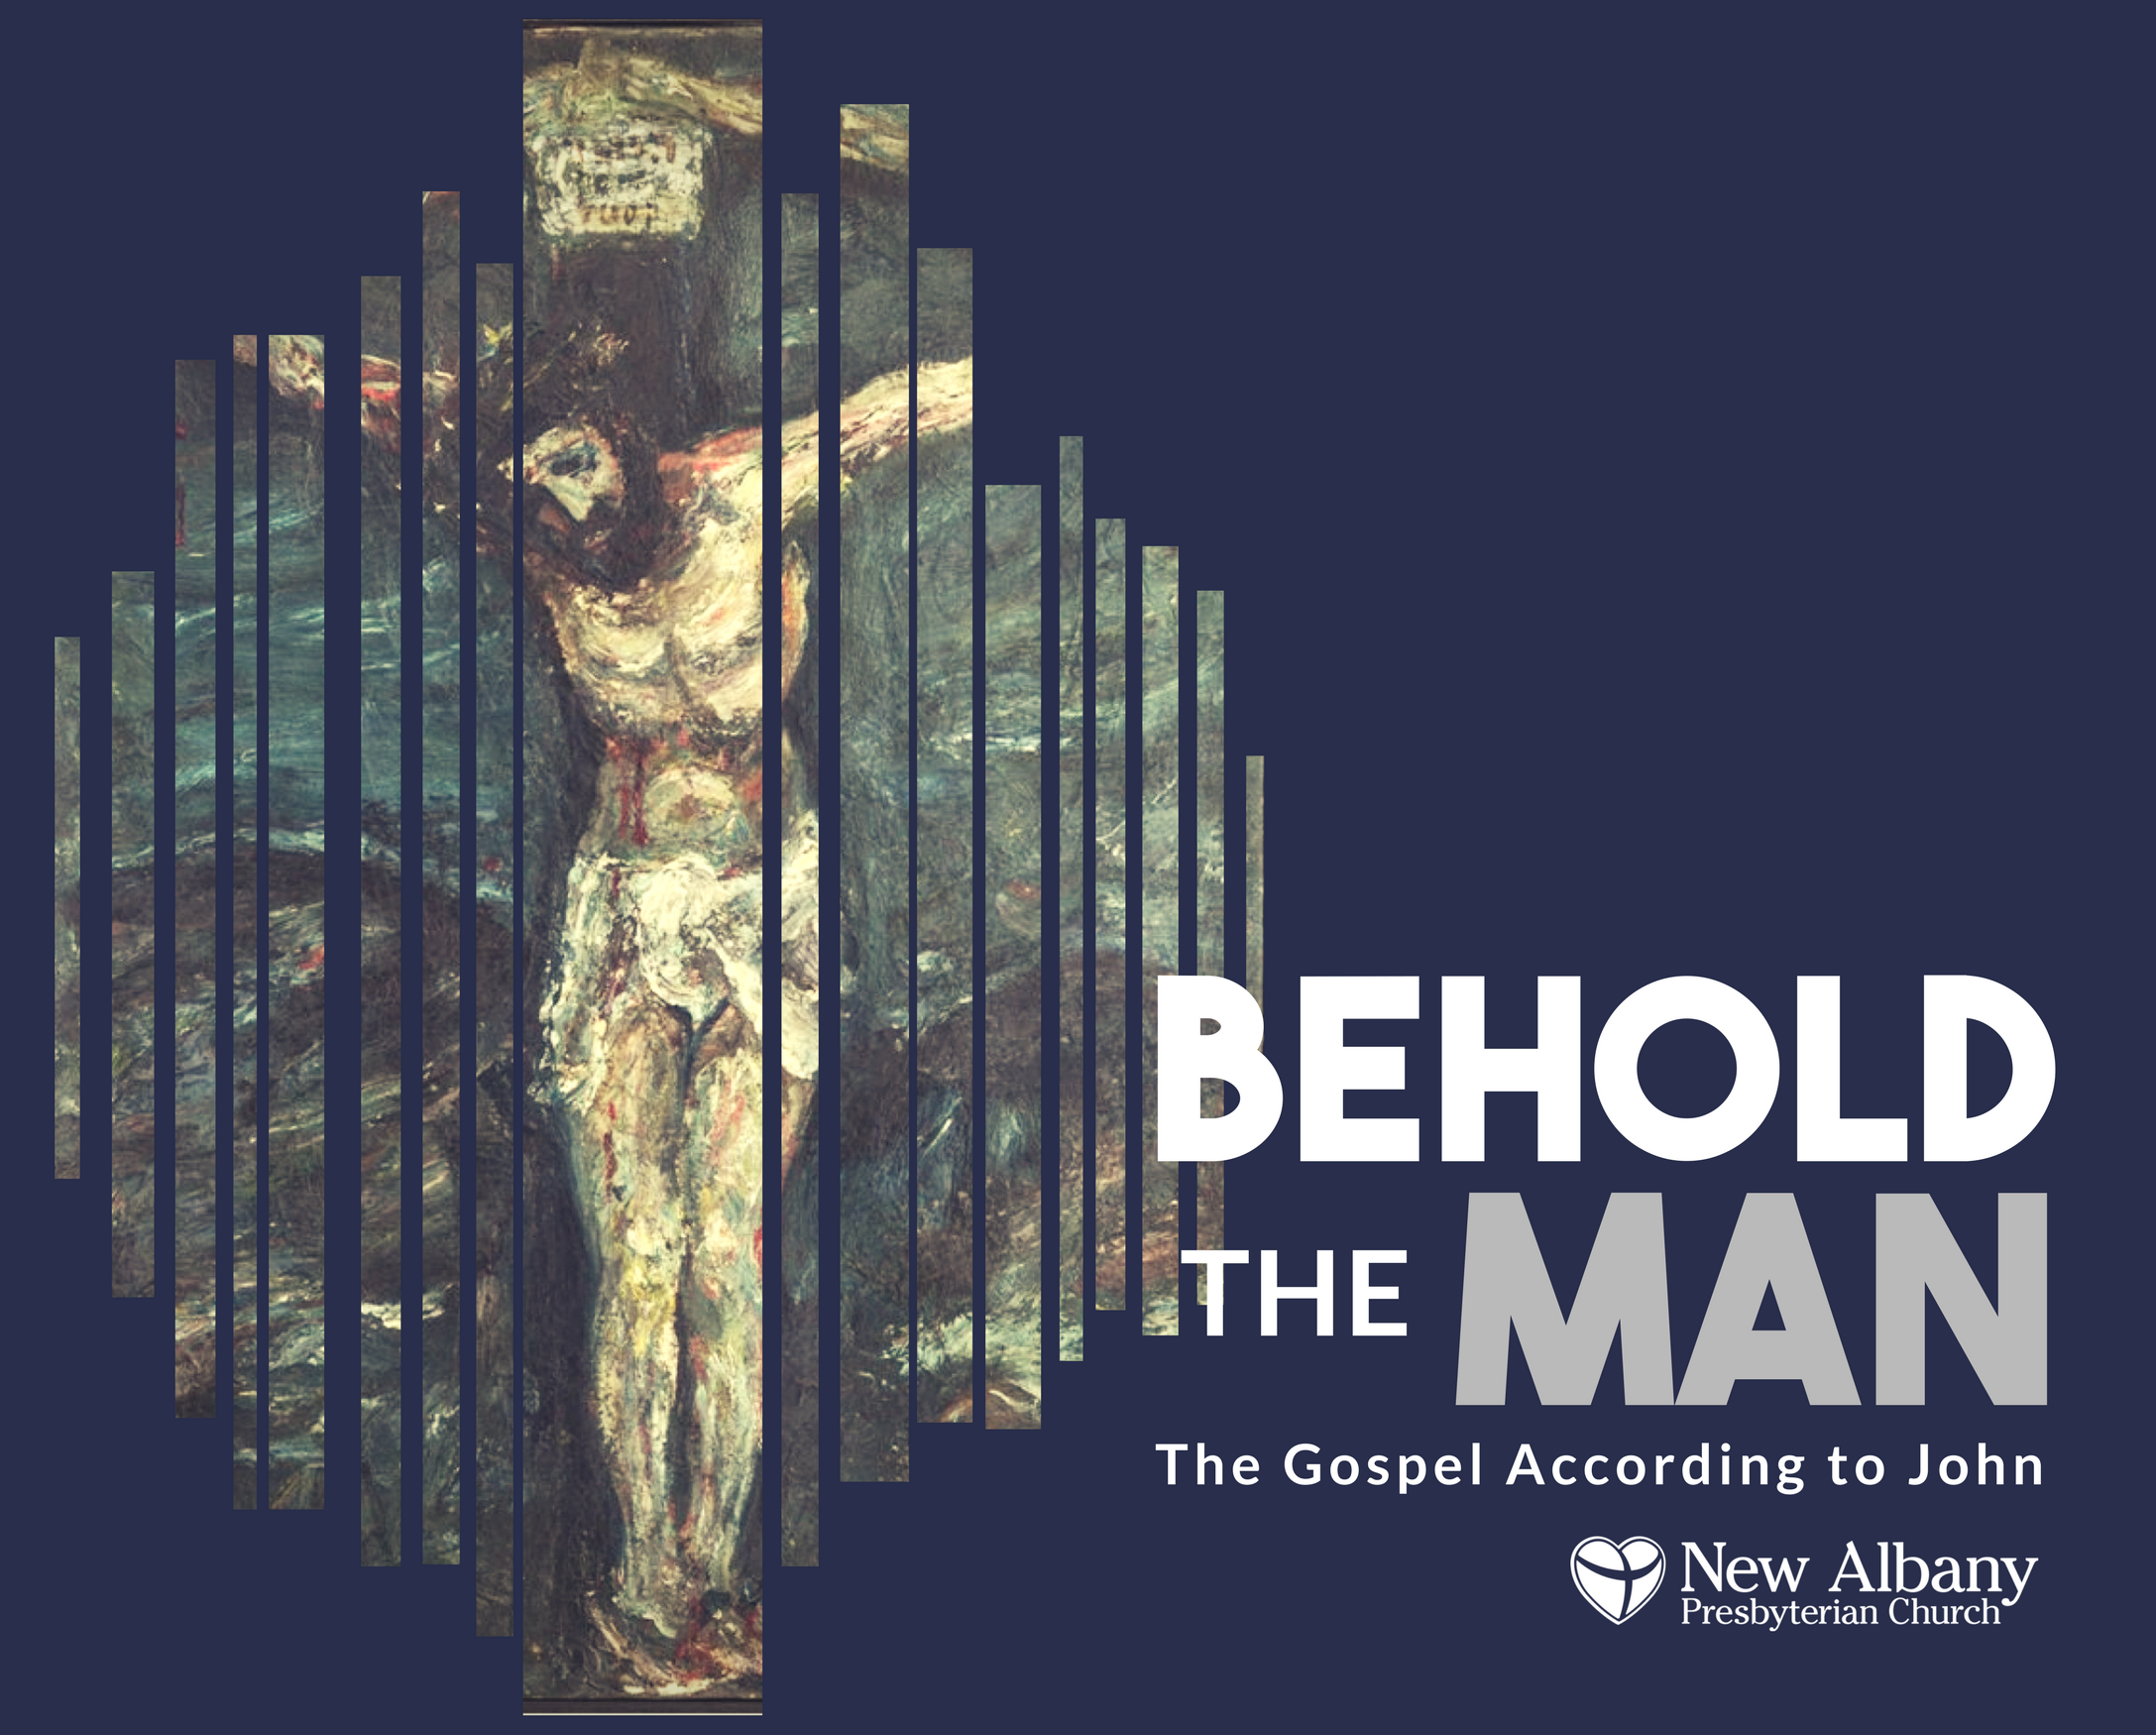 Behold the Man: Weeping with Hope